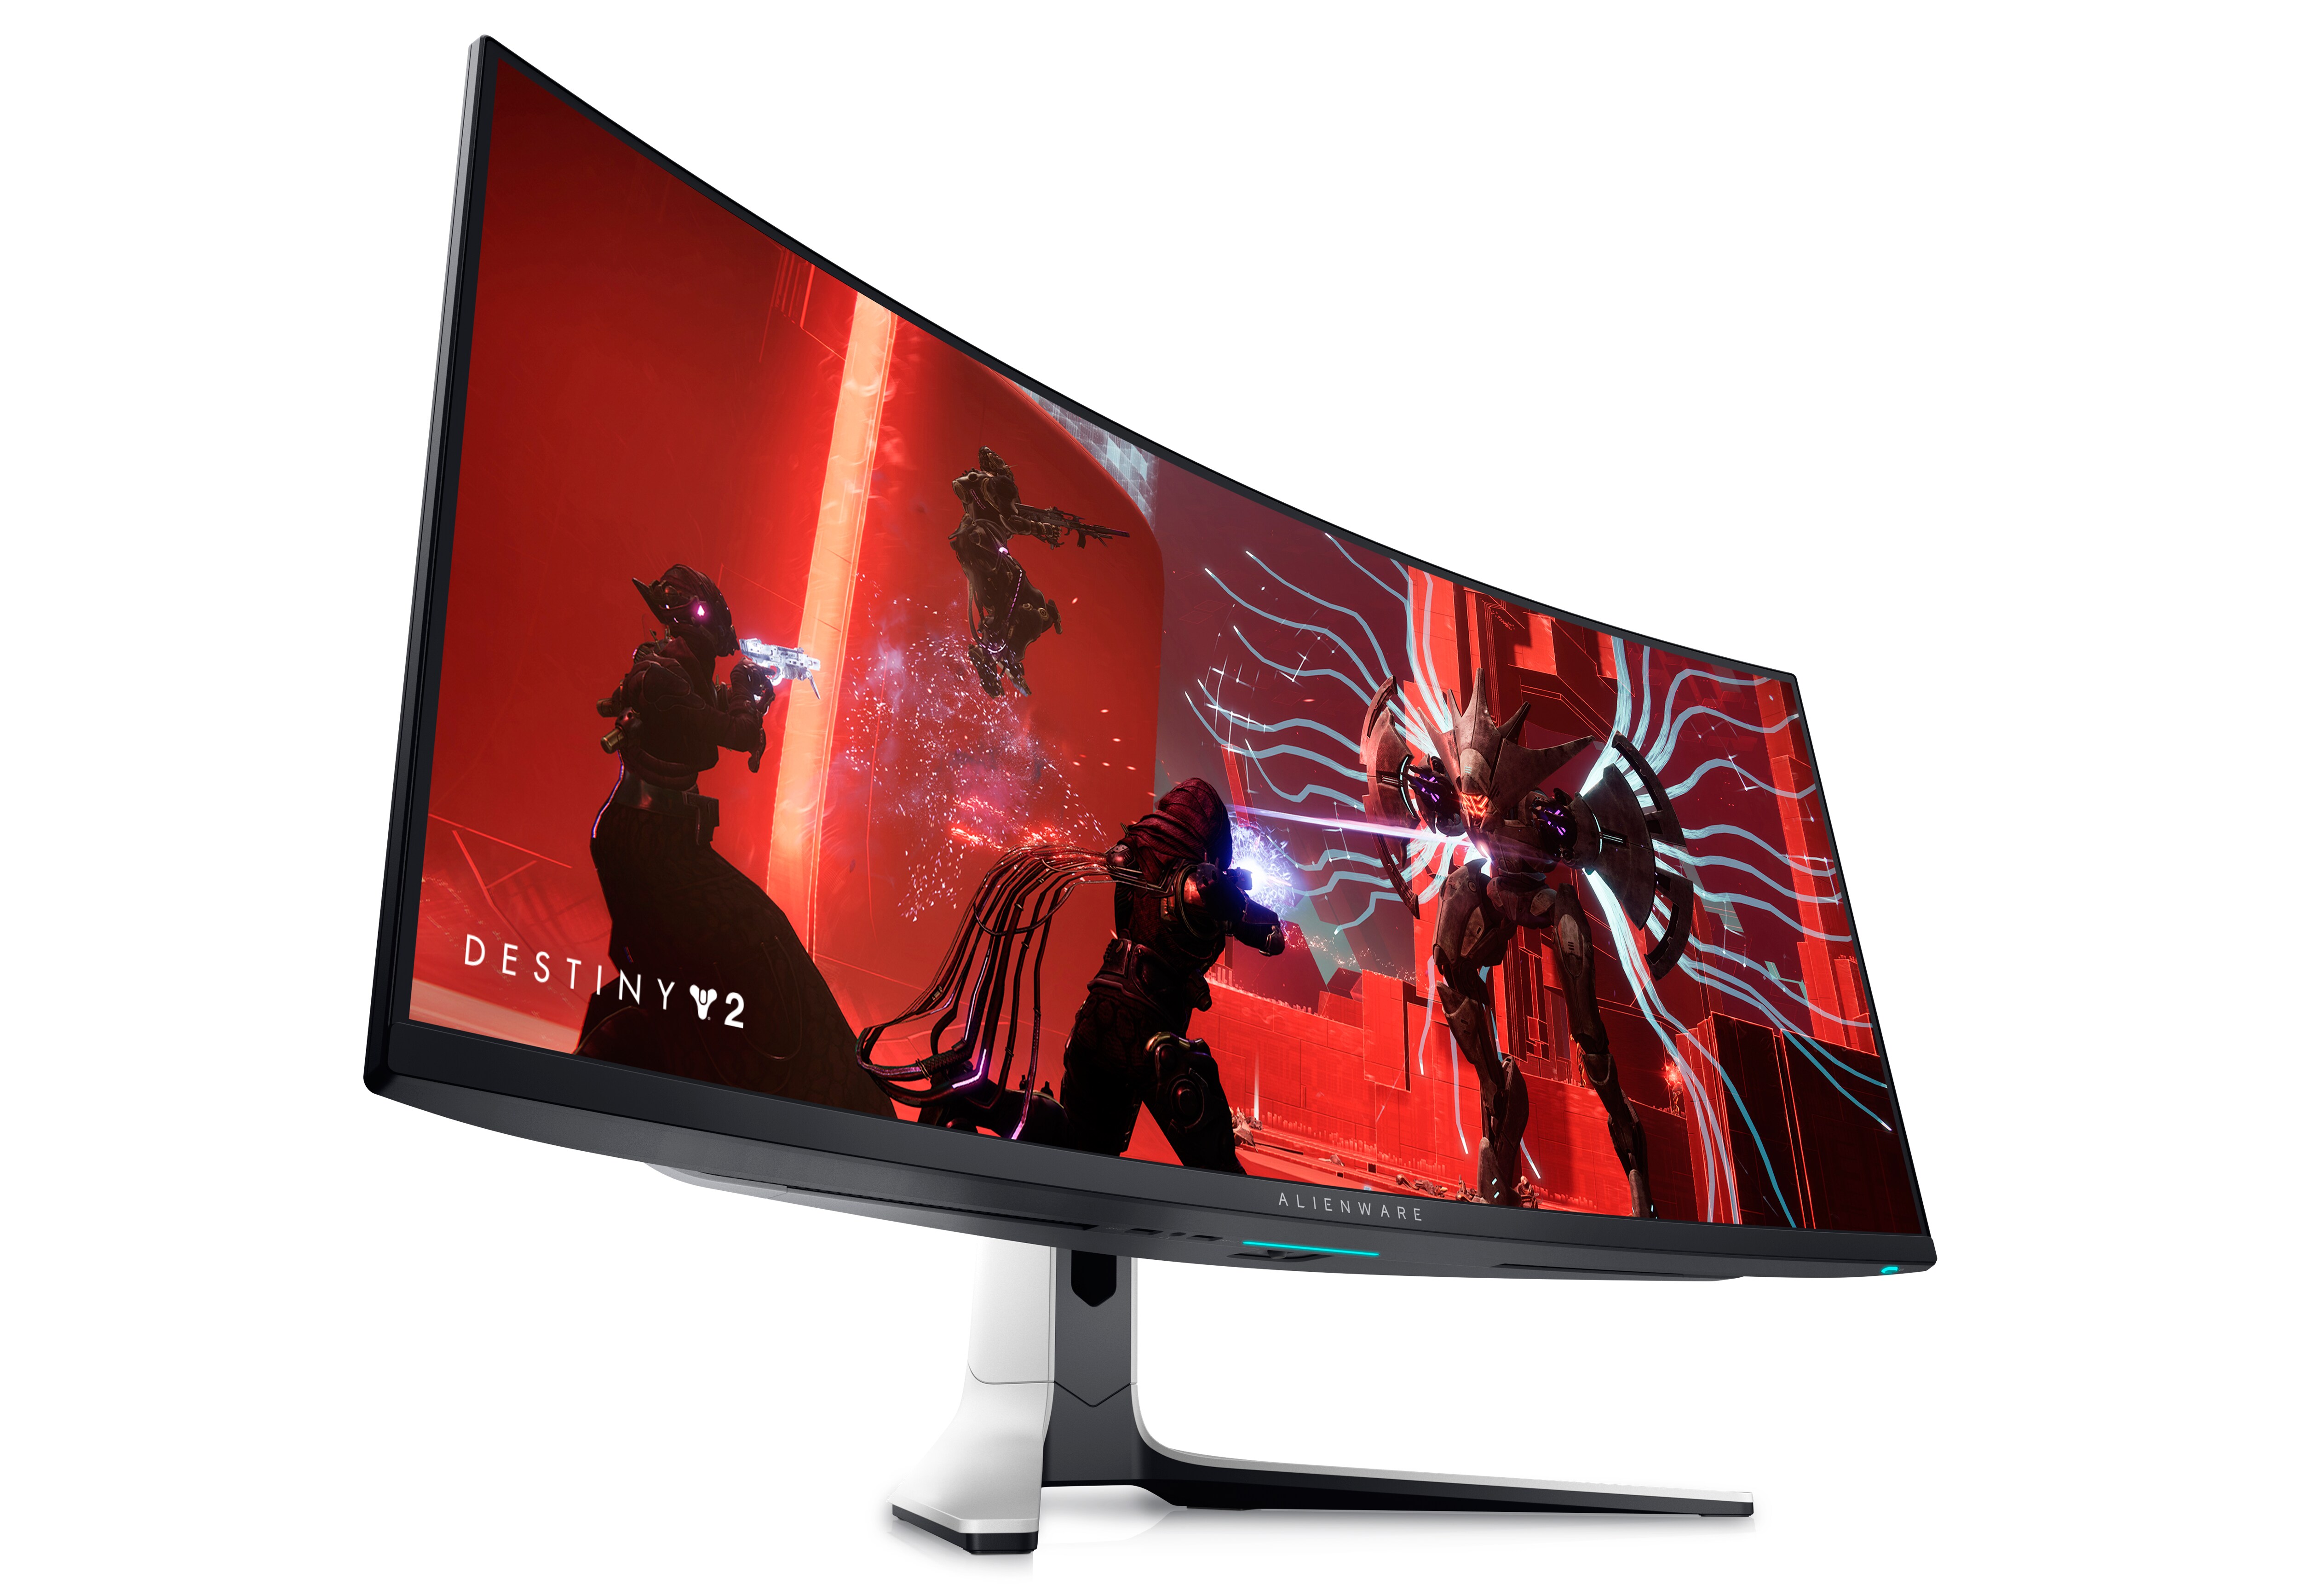 Rouwen element opschorten Alienware 34 Inch Curved QD-OLED Gaming Monitor - AW3423DW | Dell USA